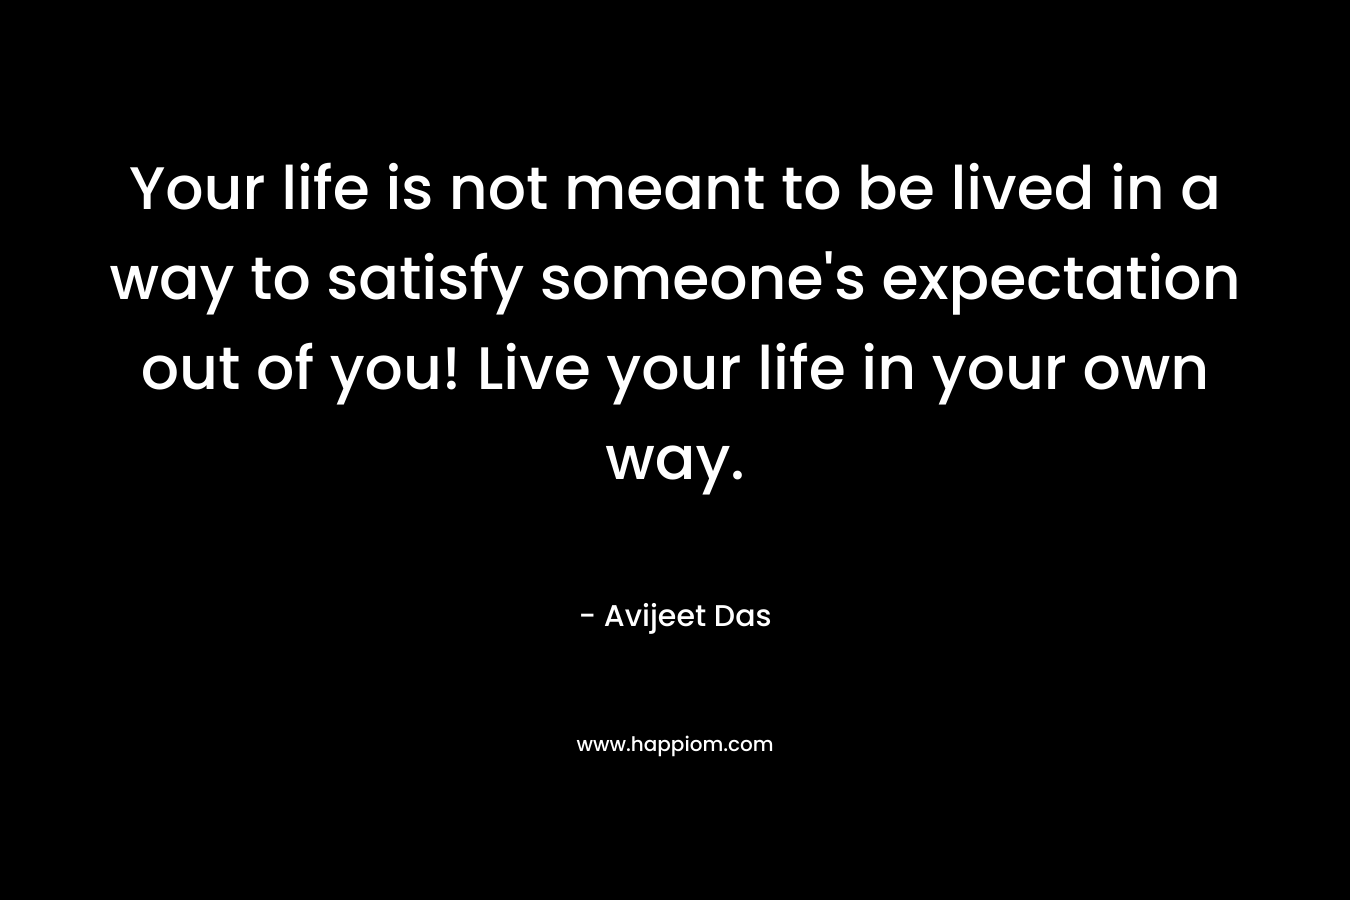 Your life is not meant to be lived in a way to satisfy someone's expectation out of you! Live your life in your own way.